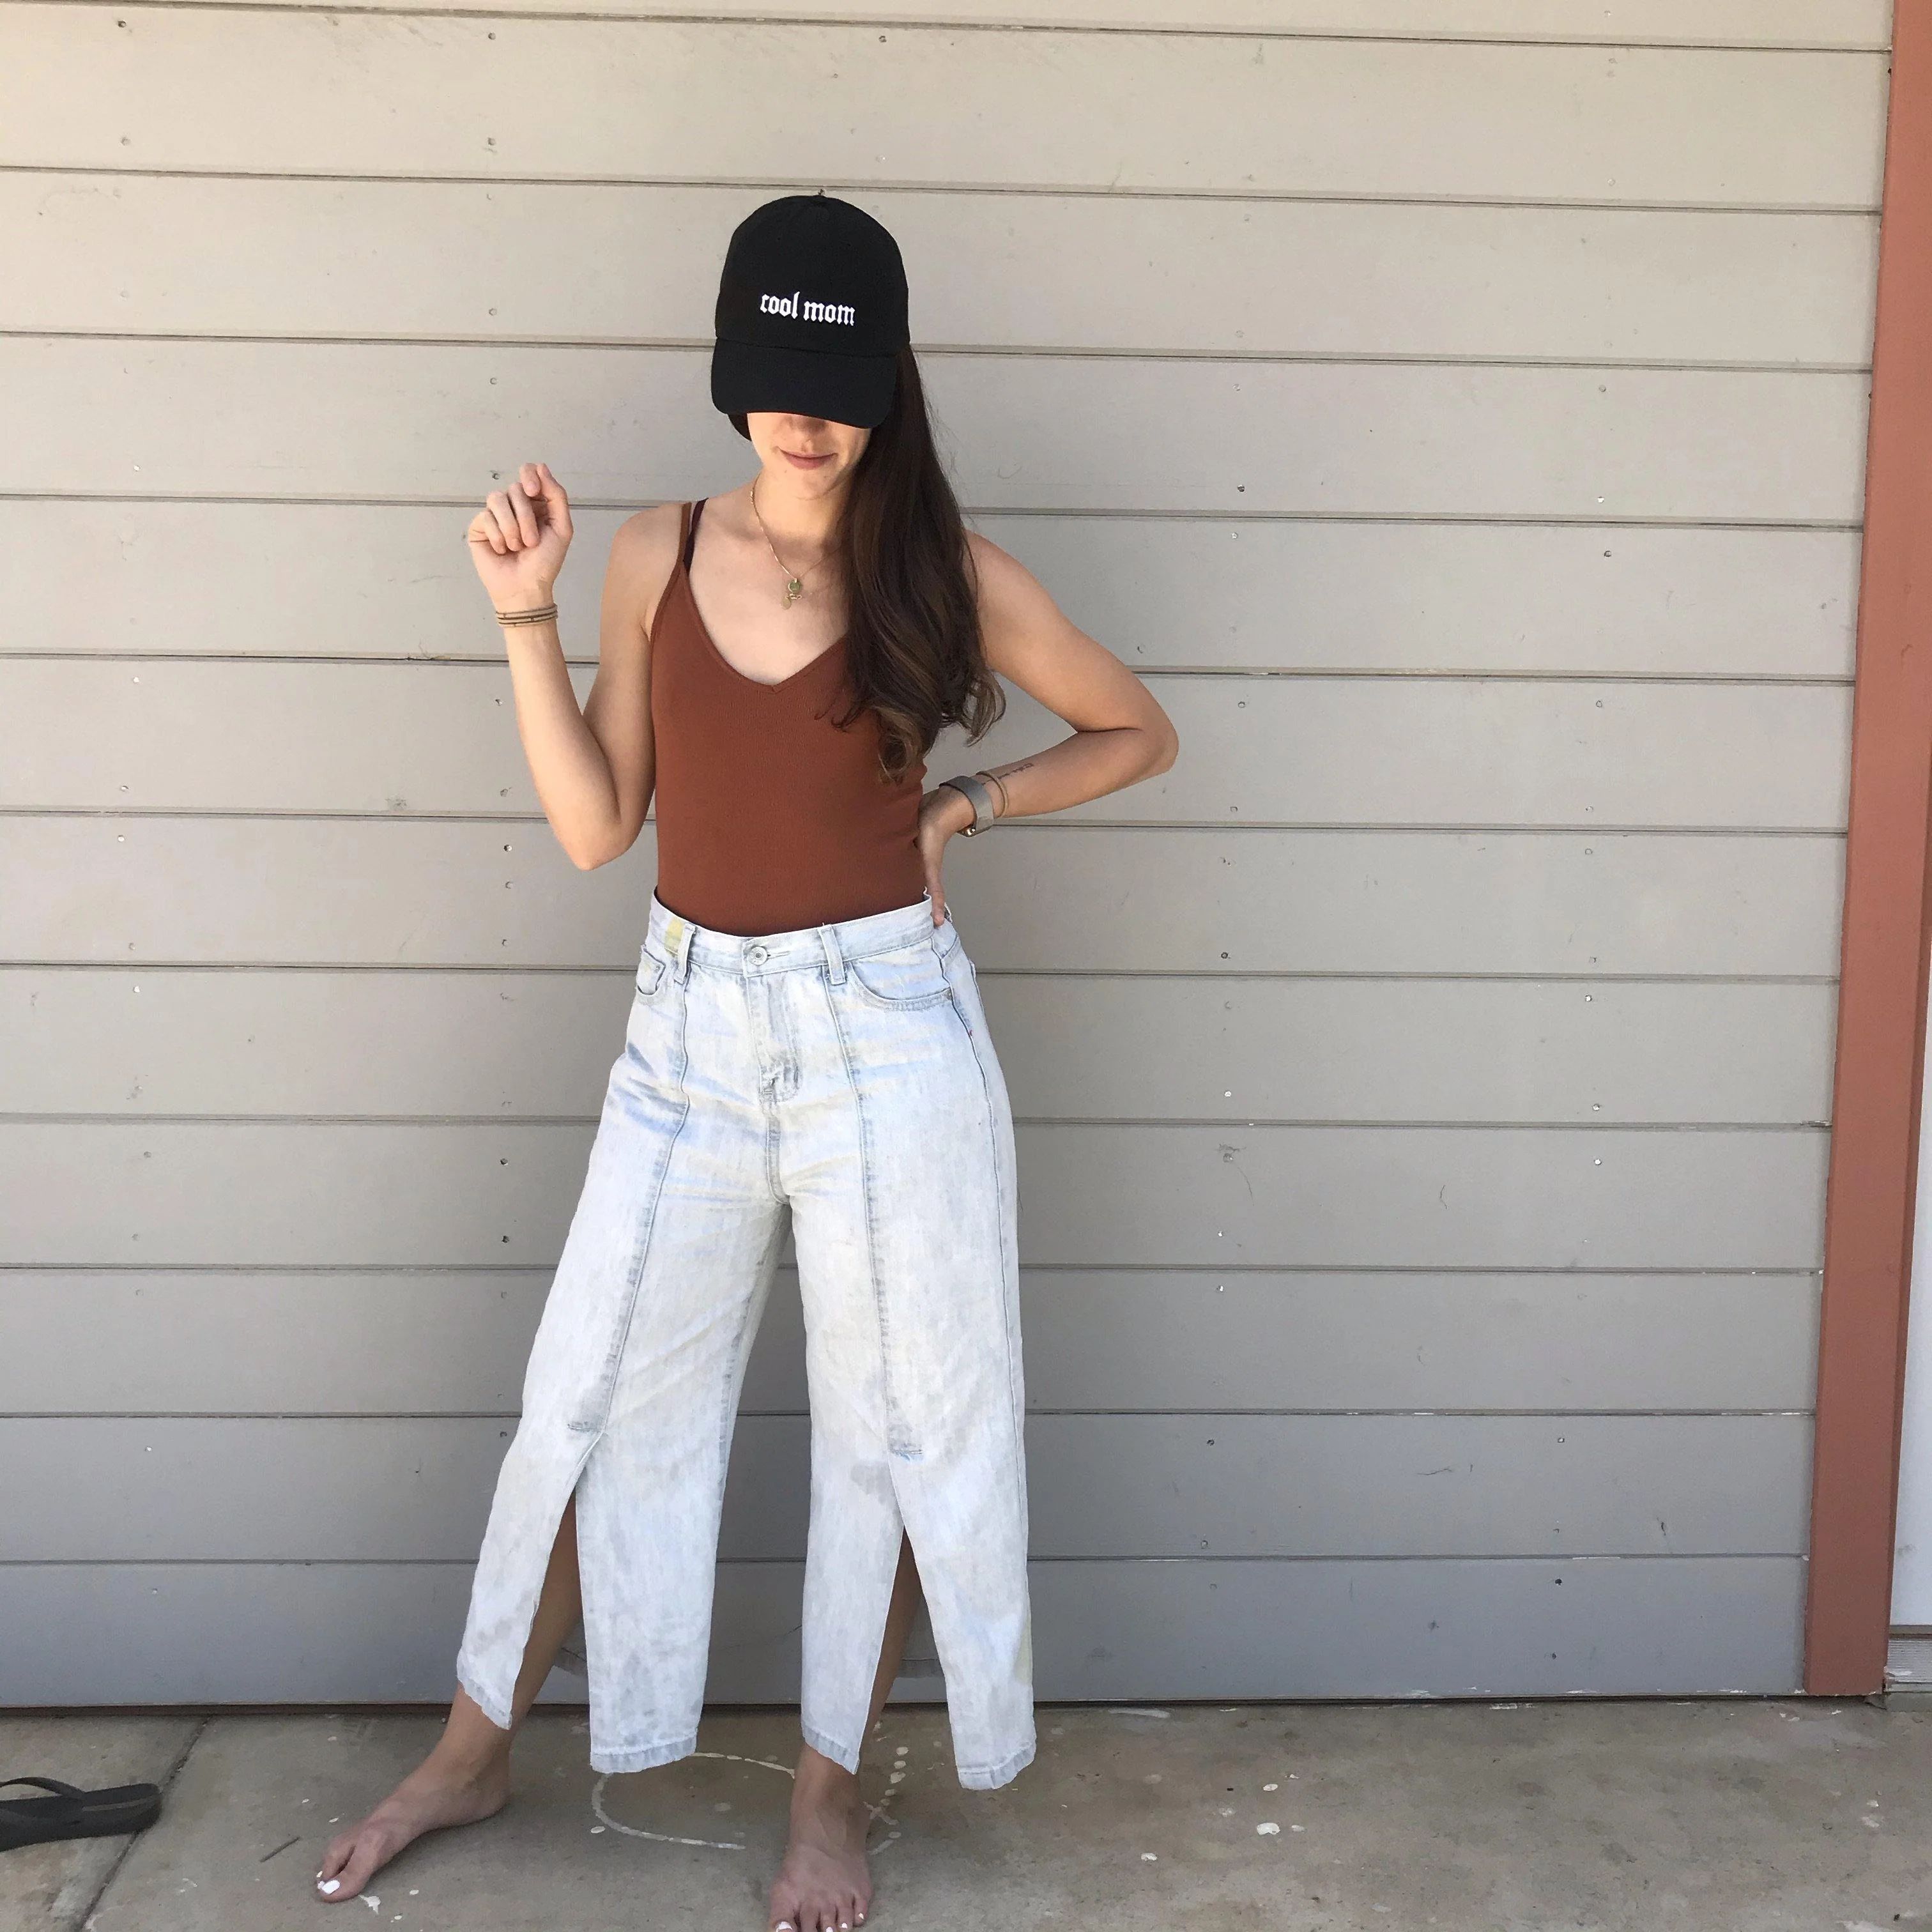 cool mom hat | Simple Heart Co